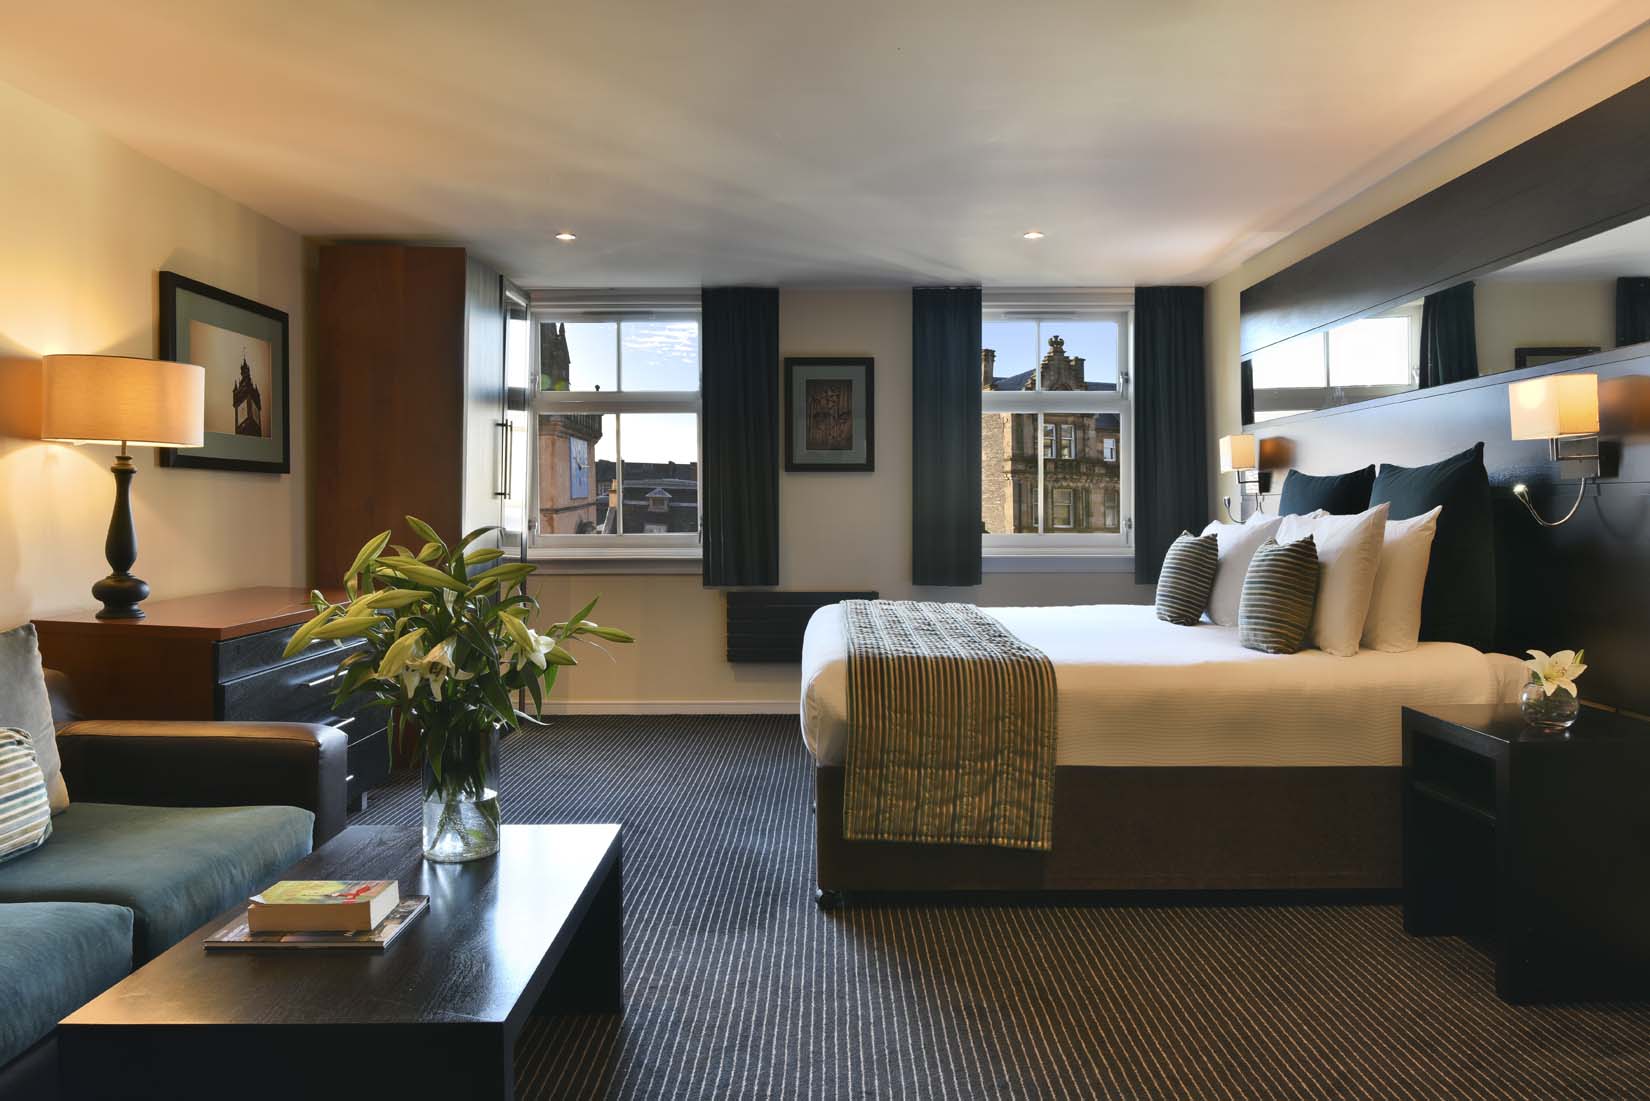 Fraser Suites Glasgow serviced apartments with view to city for family breaks in scotland